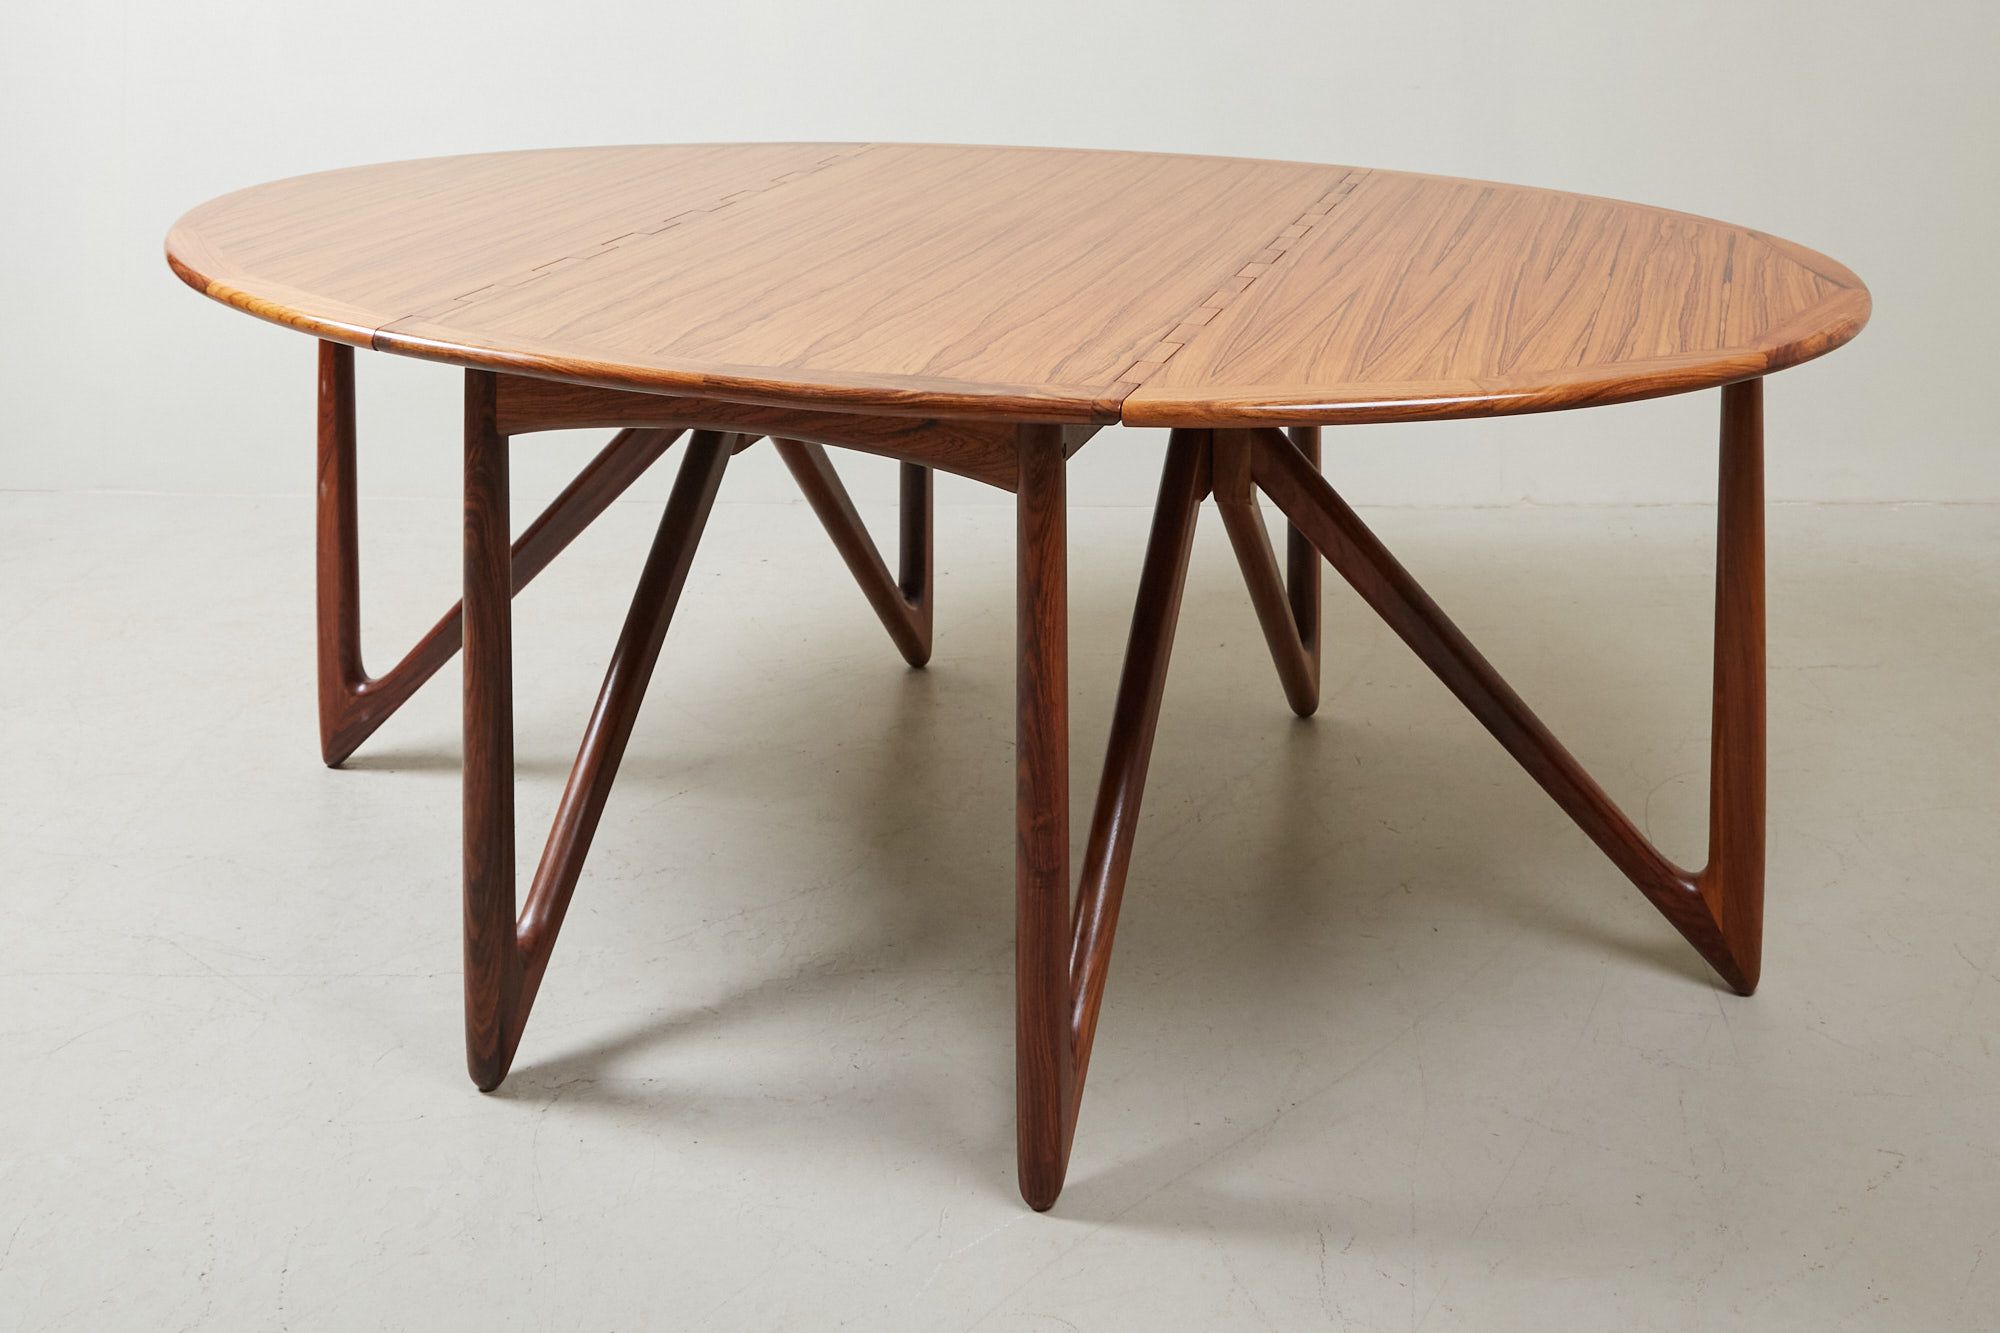 Drop Leaf Tables With Hairpin Legs Within Favorite Danish Drop Leaf Tablekurt Ostervig For Jason Mobler (View 4 of 20)